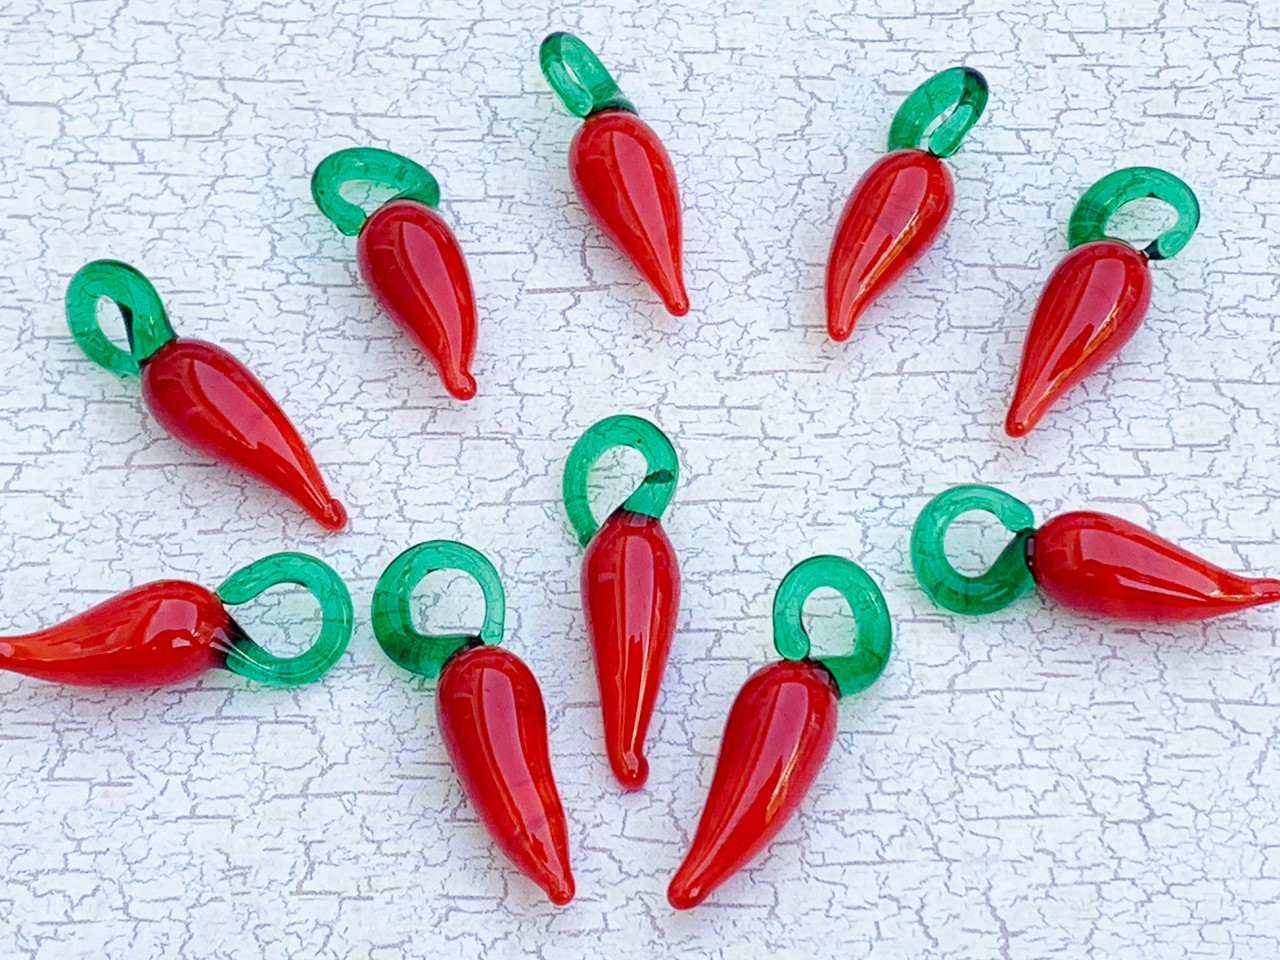 25 Glass Chilli Pepper Charms Purple or Mixed 23mm Red Green